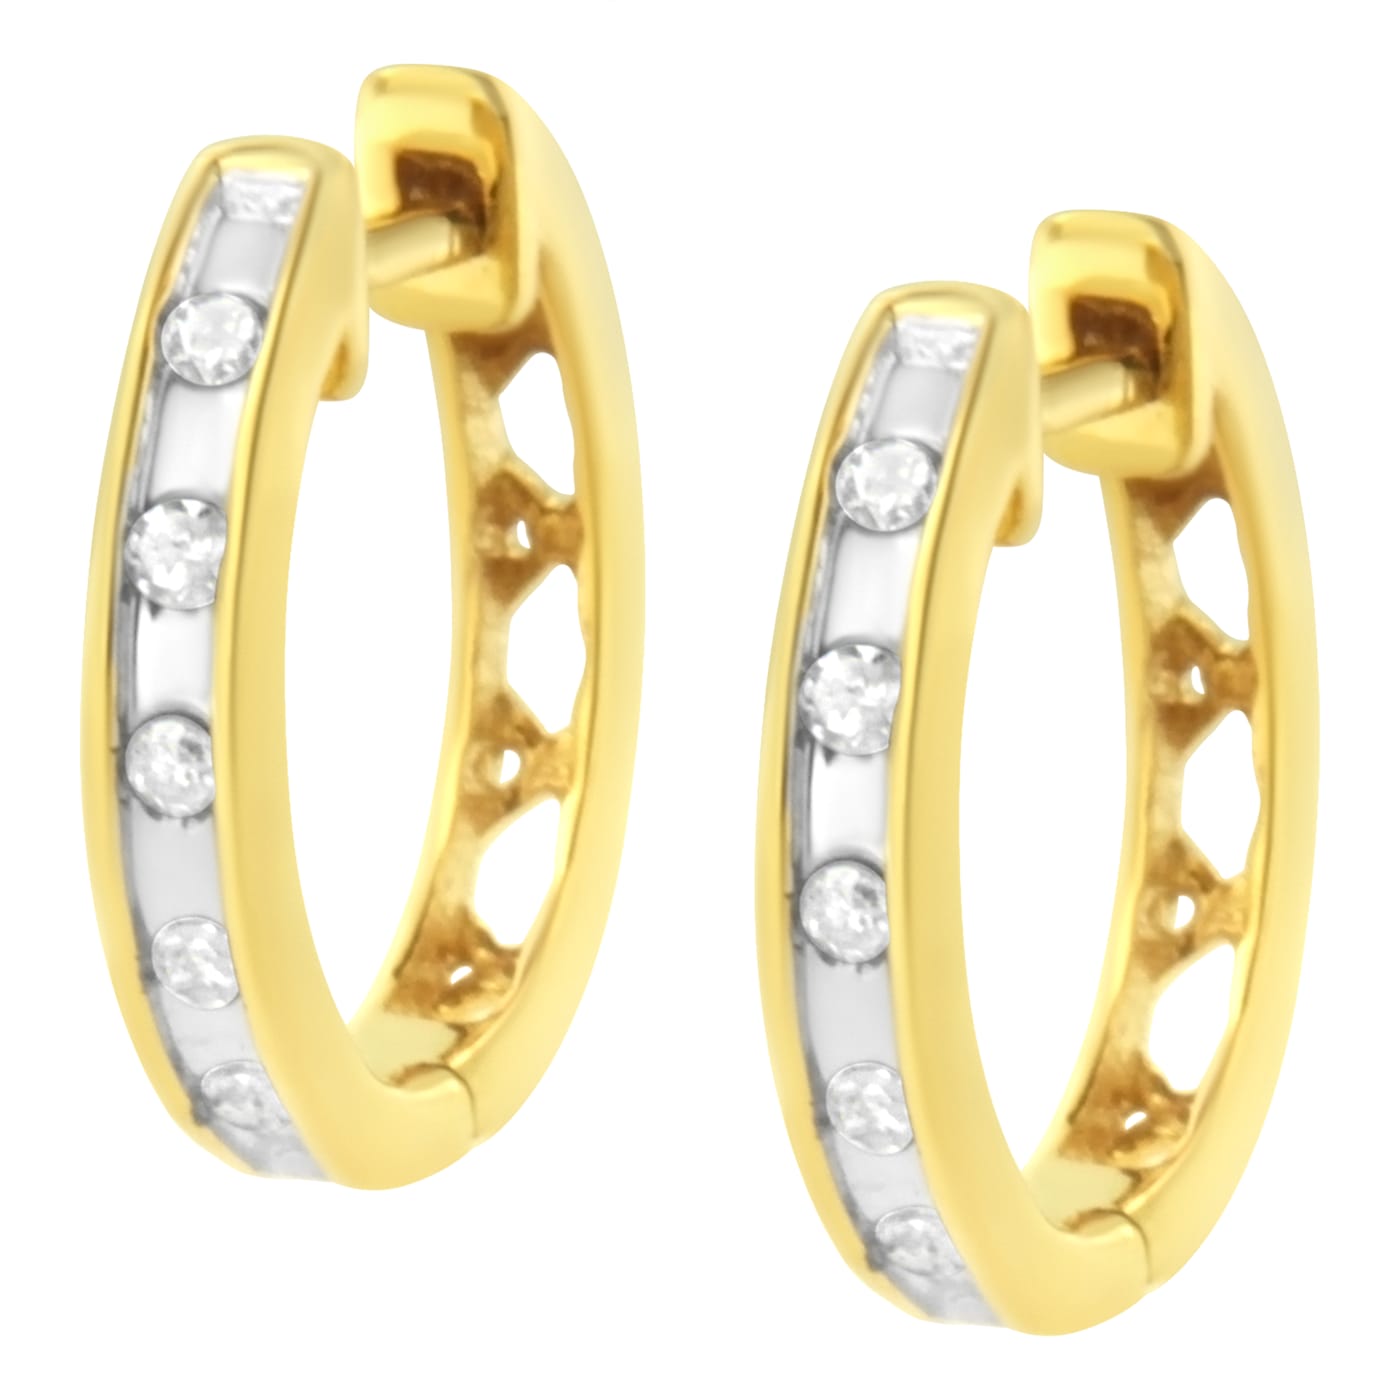 10K Yellow Gold Over Sterling Silver Channel Set Round-Cut Diamond 